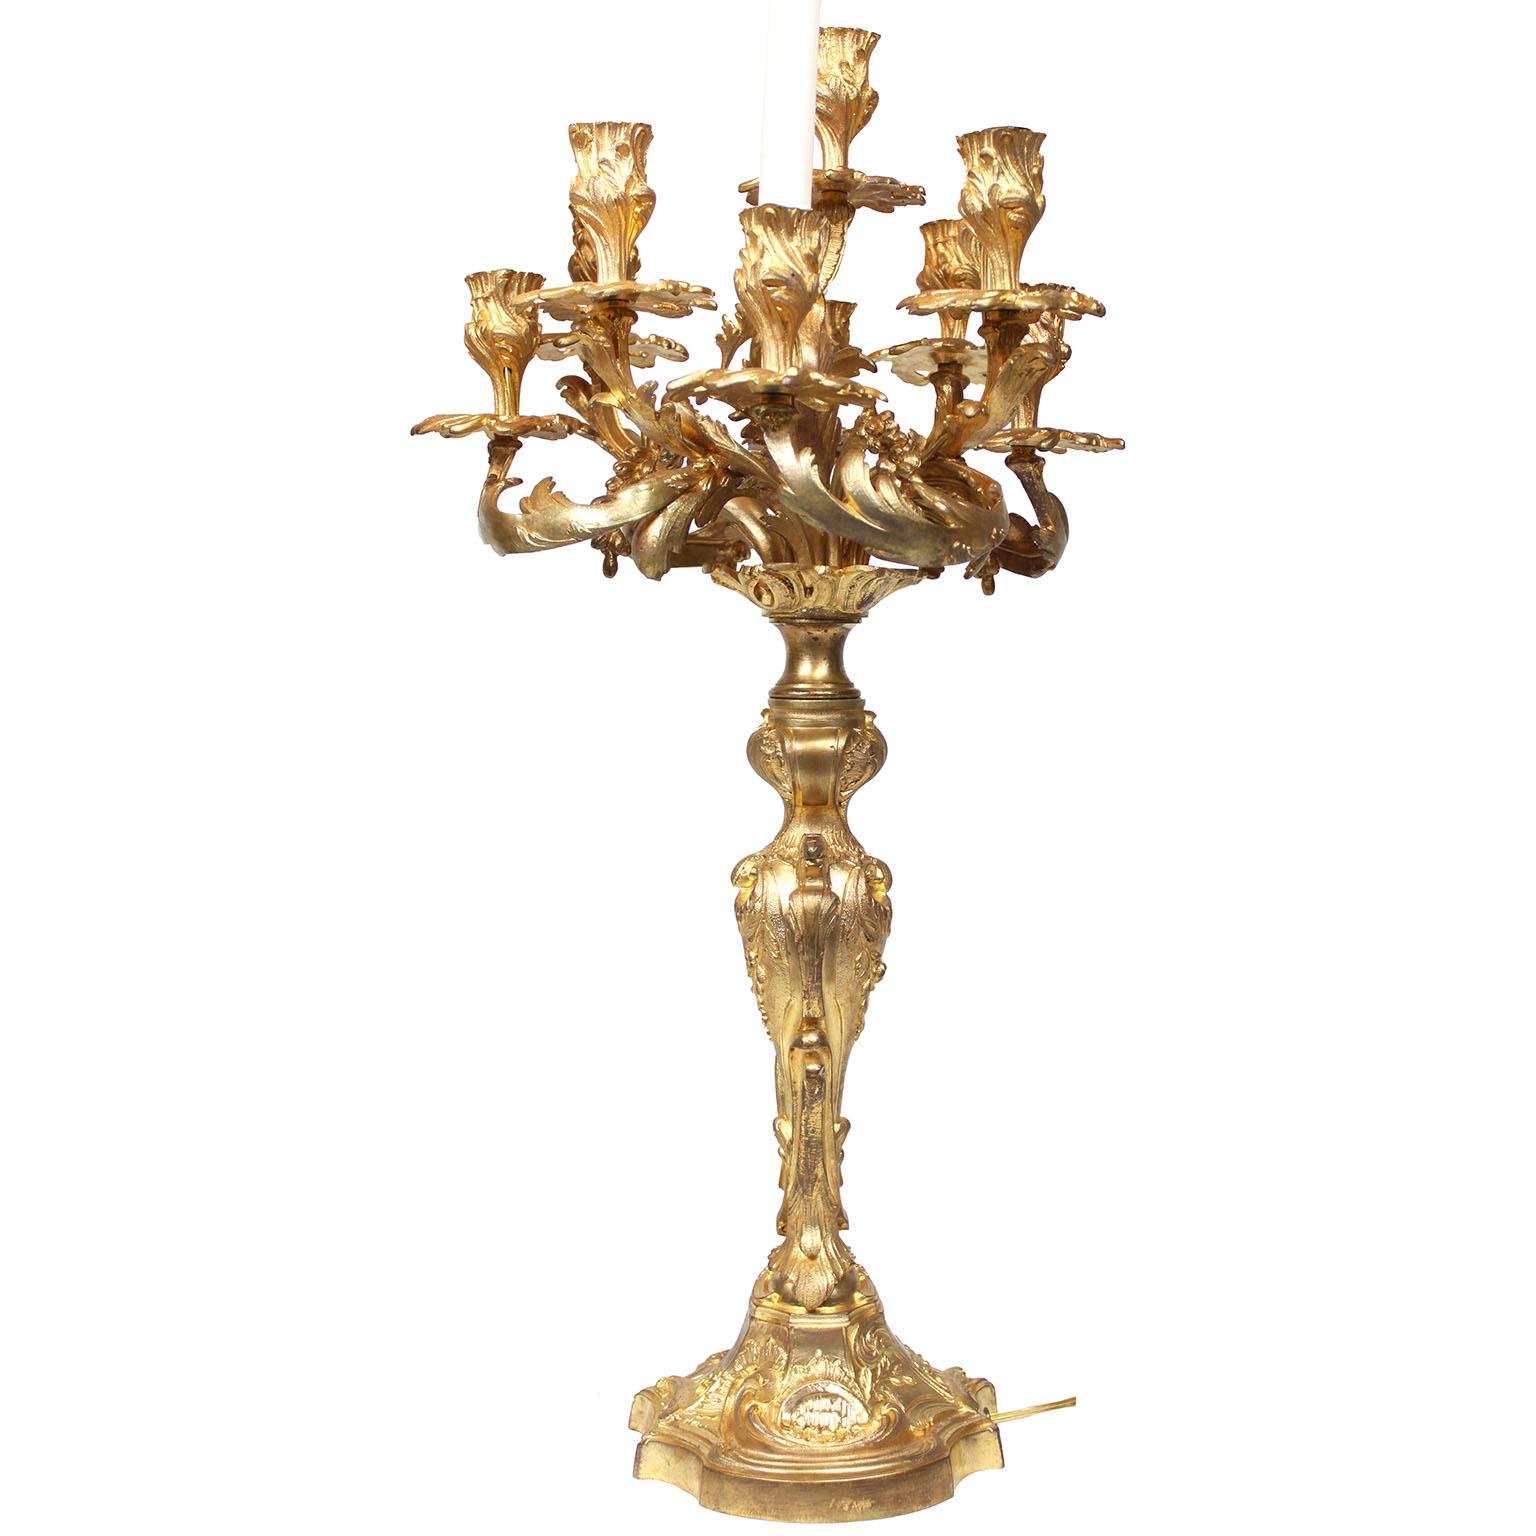 A Pair of French 19th Century Louis XV Style Gilt-Bronze Nine-Light Candelabra For Sale 1